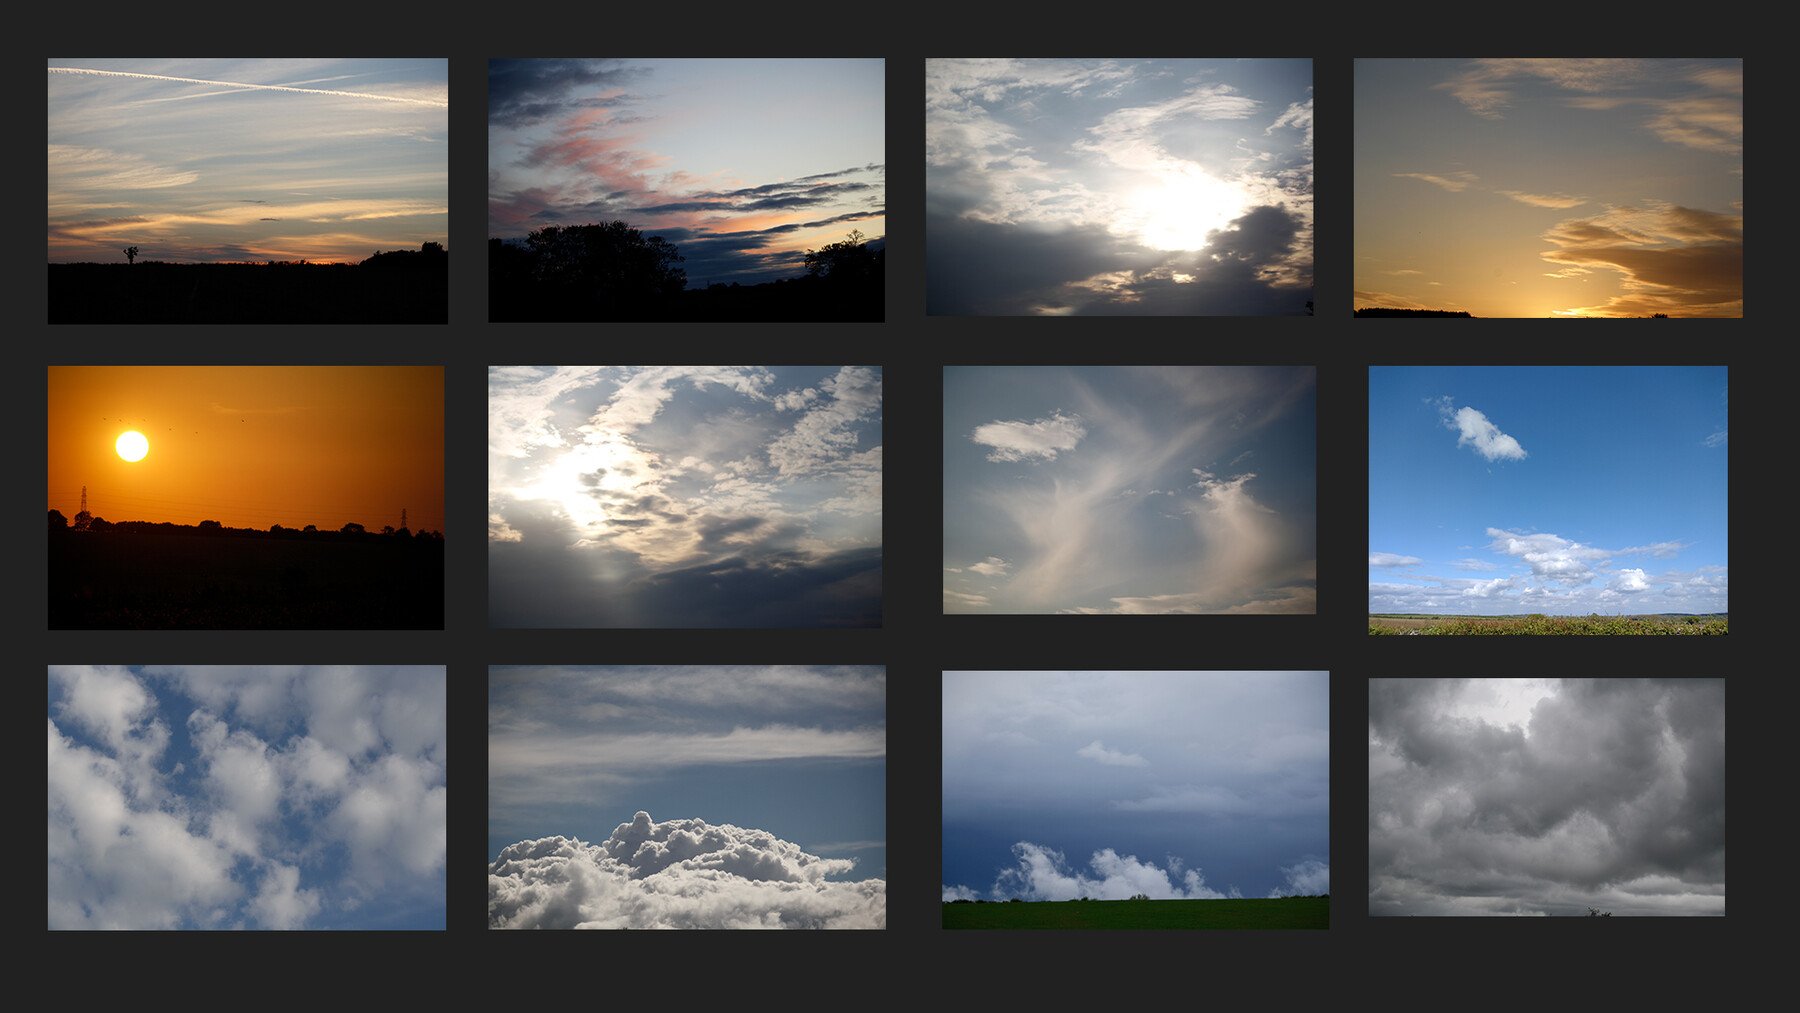 ArtStation - SKIES PHOTO PACK - 300+ reference photos of skies | Resources